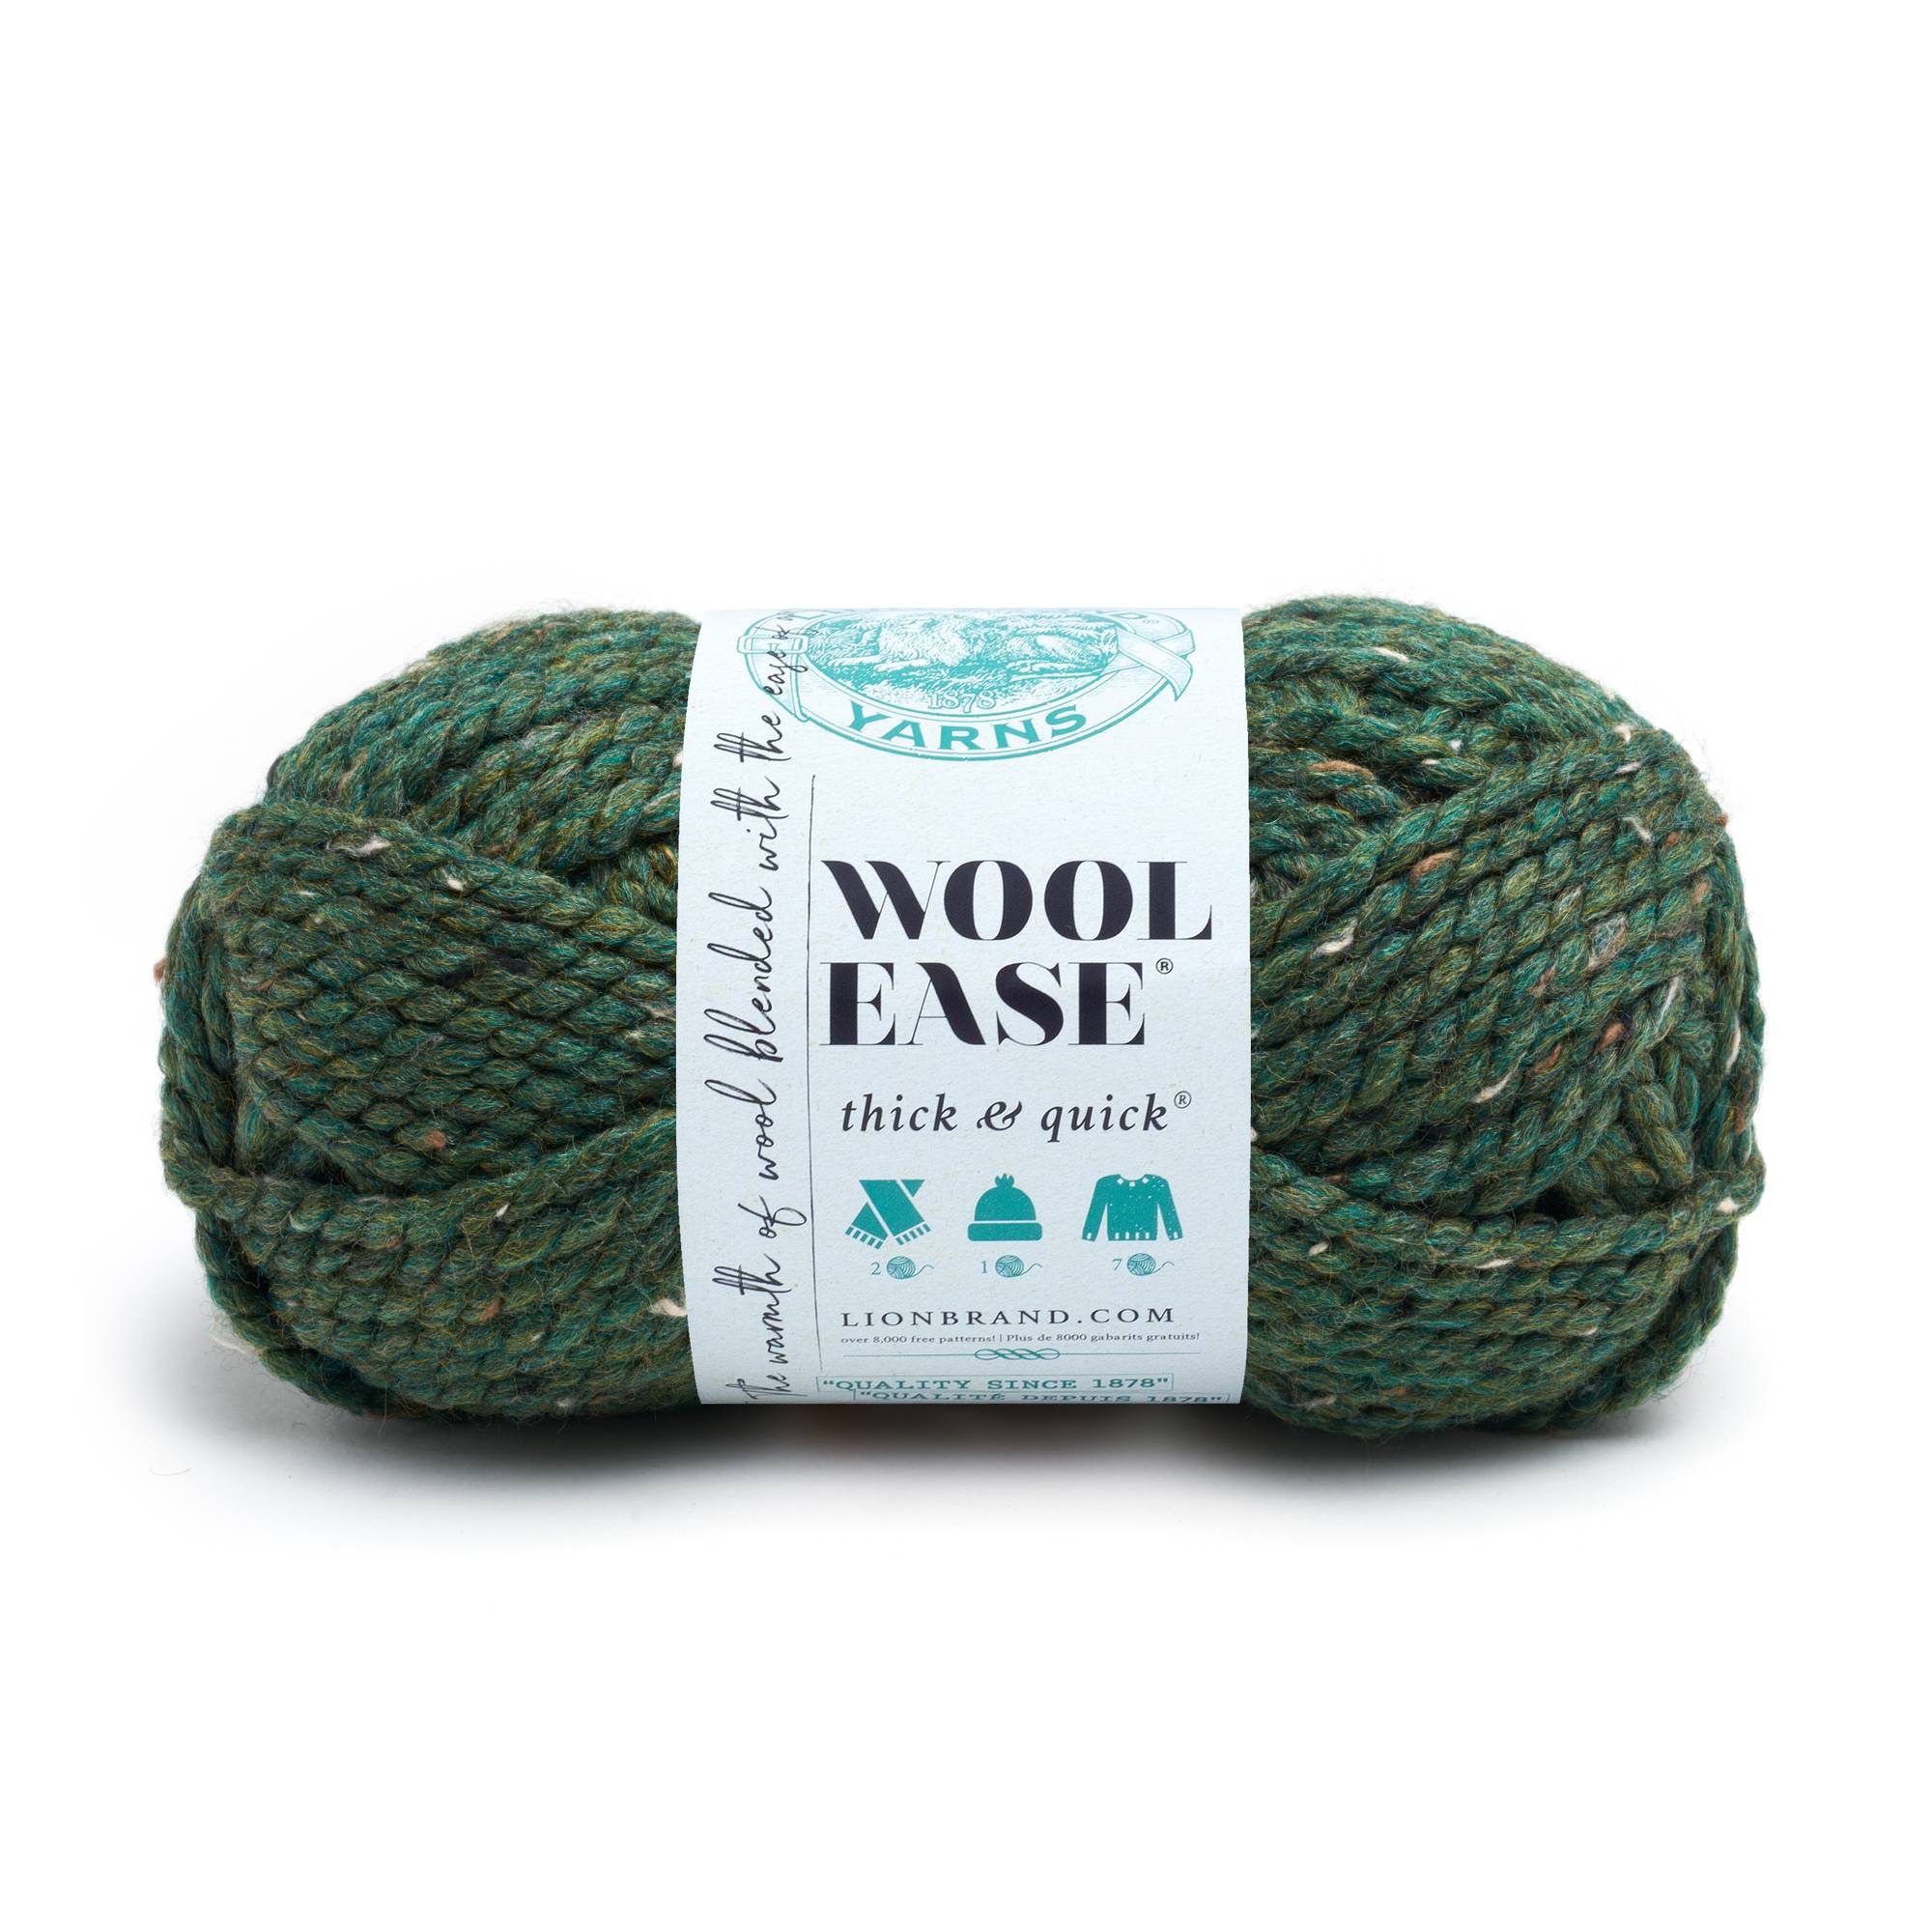 Lion Brand Wool-Ease Yarn -Fisherman, 1 count - Foods Co.